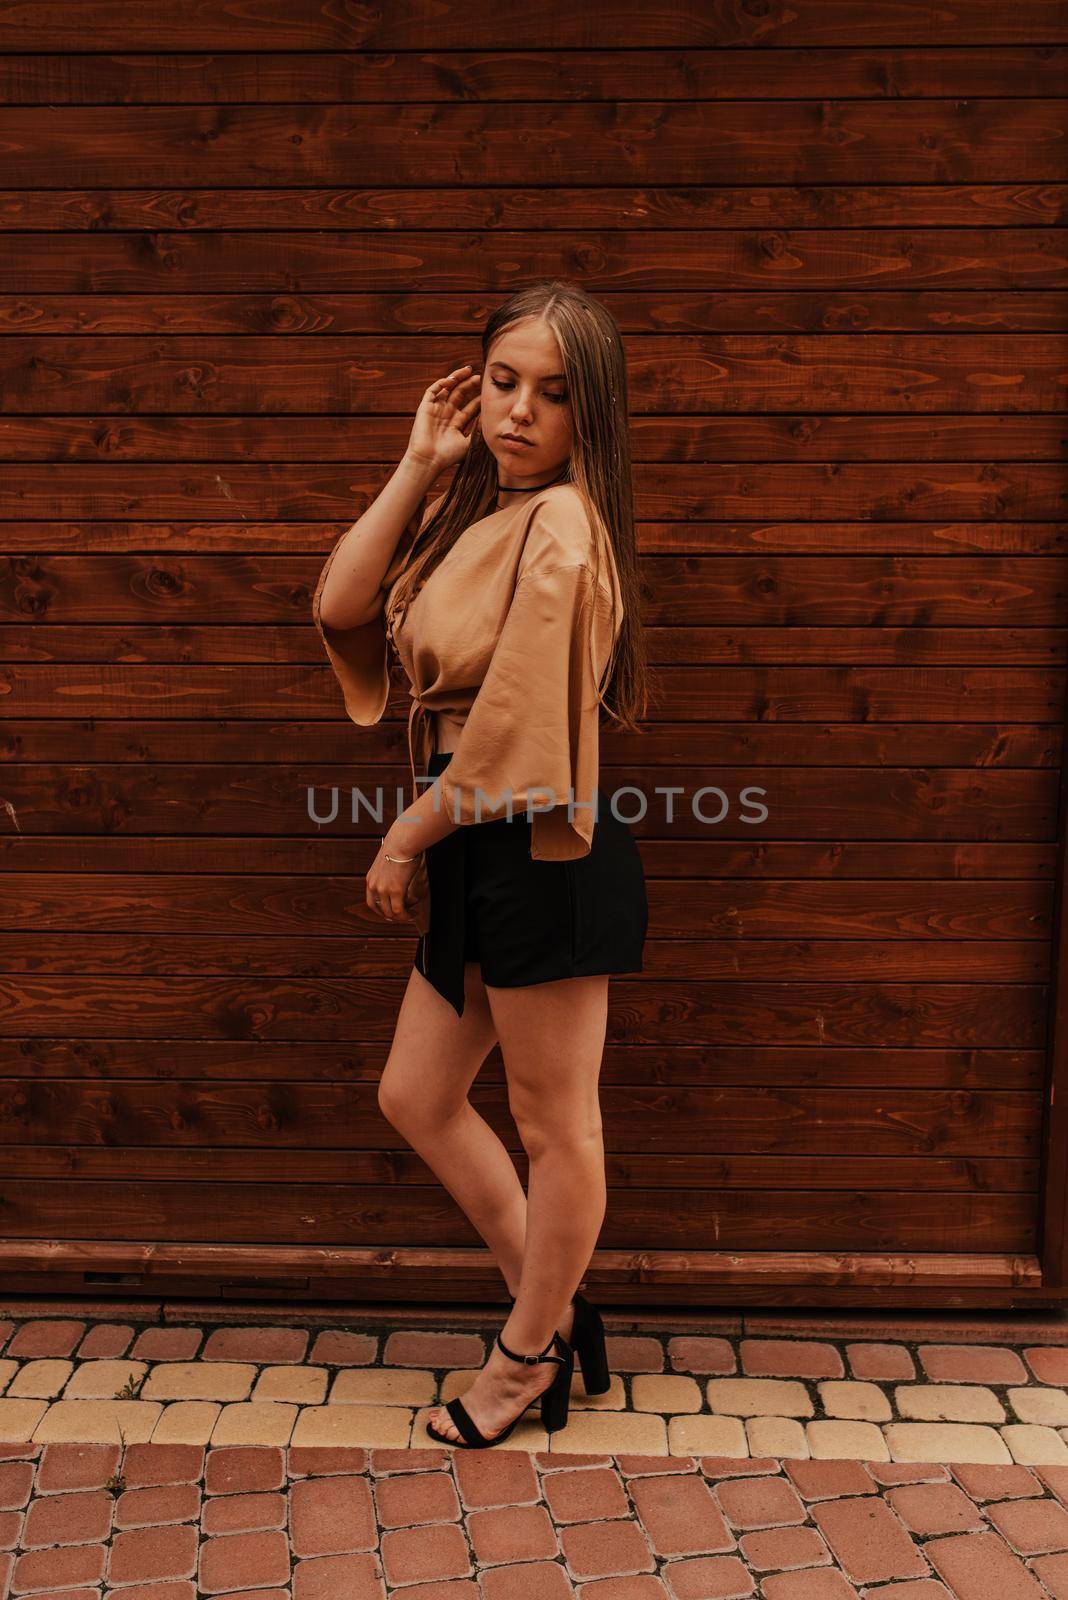 Ukrainian young woman in a mini skirt. Fashion summer 2021 style glamorous. Brown wooden striped background.